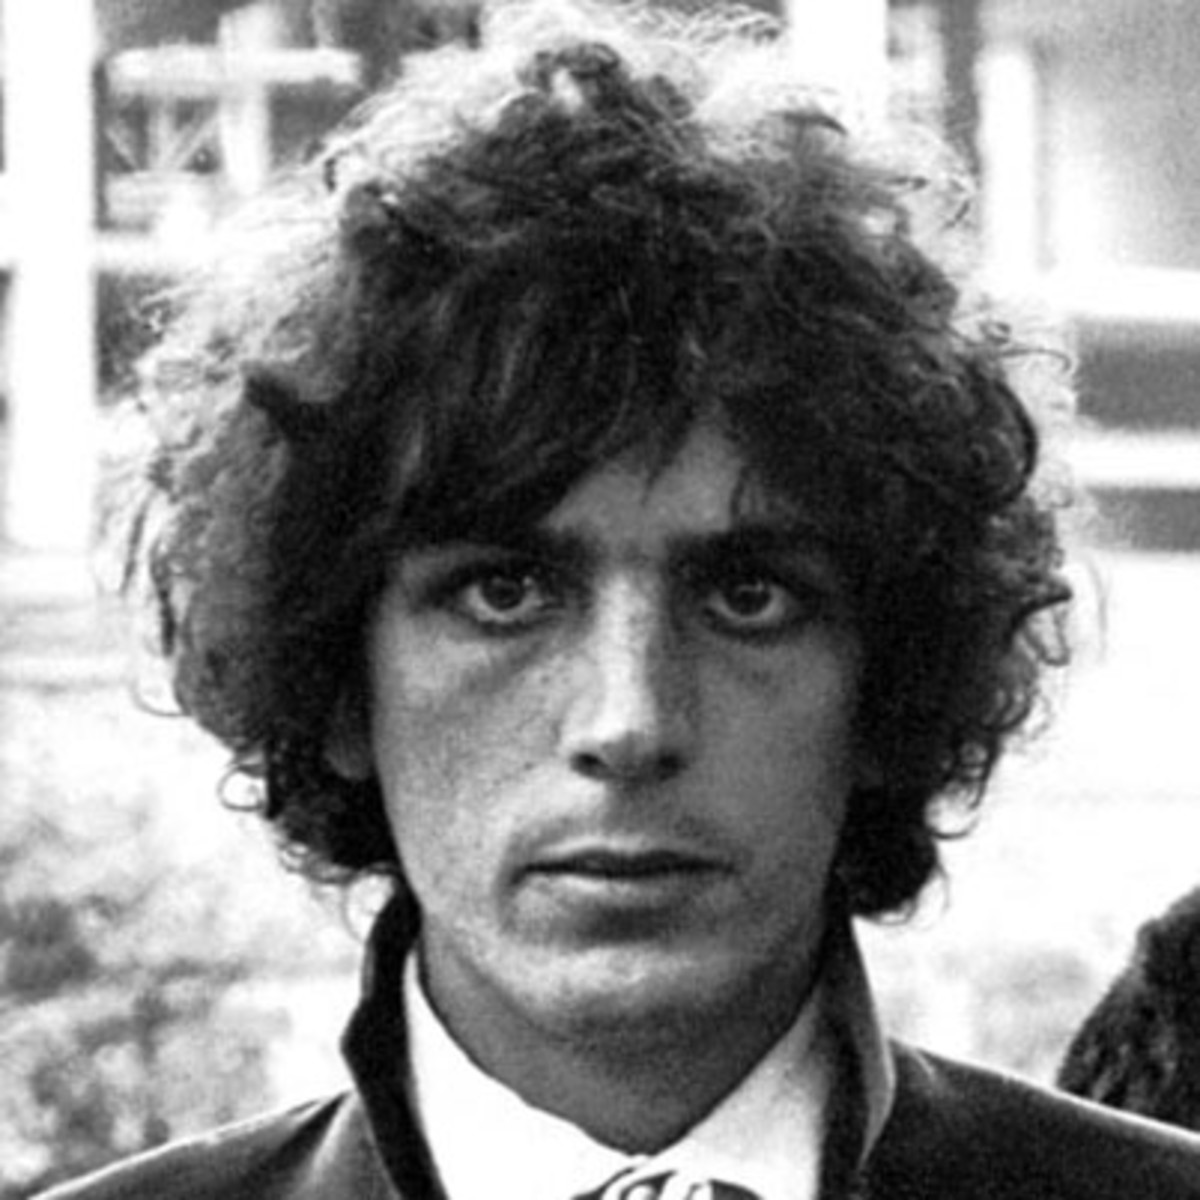 This is Syd Barrett, one of a huge number of actually schizophrenic musicians to have the "George Harrison look"